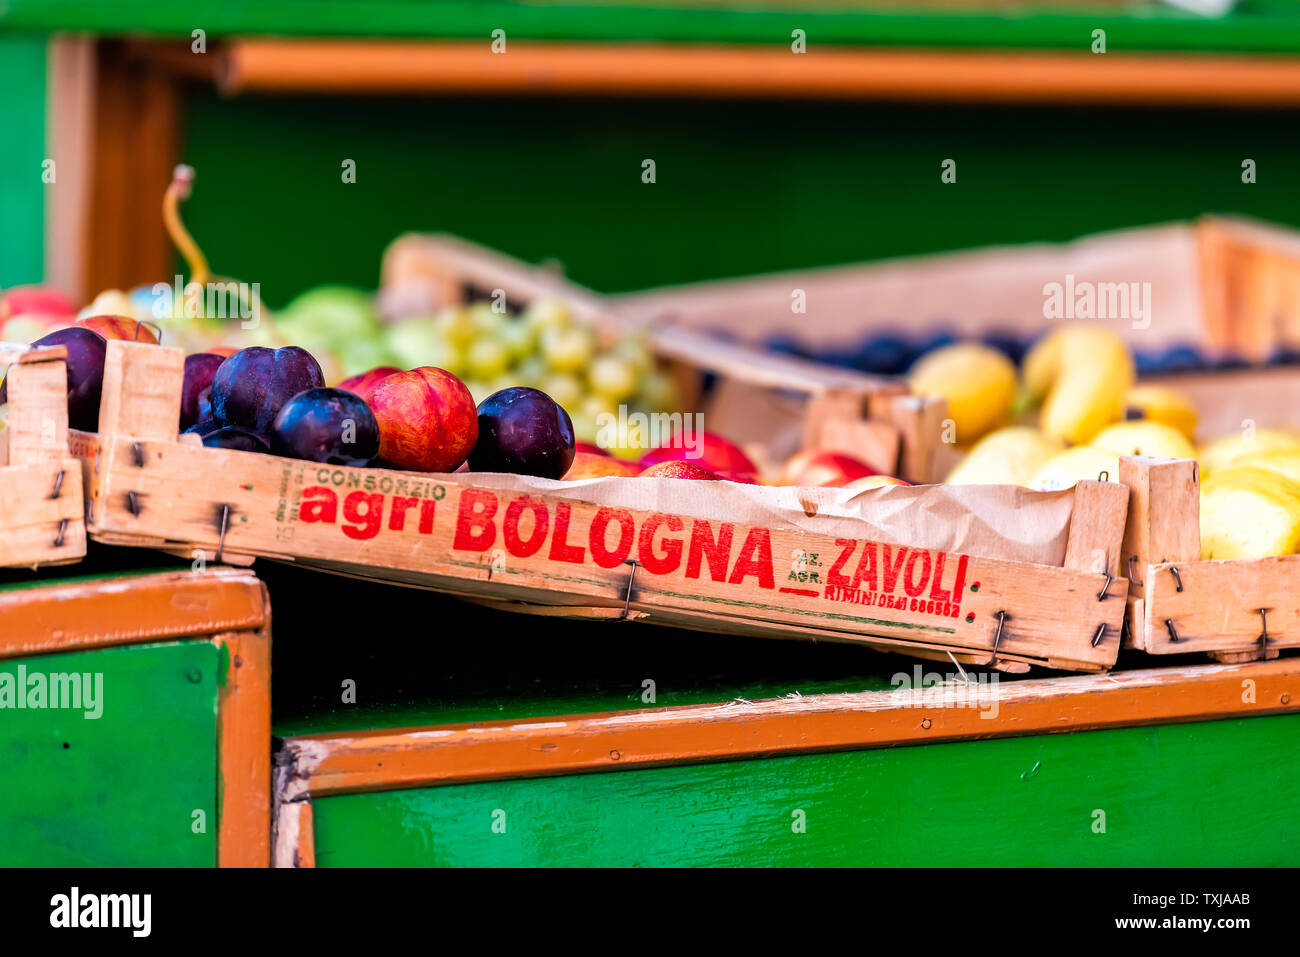 Siena, Italy - August 27, 2018: Closeup of fresh ripe fruit in farmer's market in Tuscany during summer with Bologna sign on wooden crate boxes Stock Photo